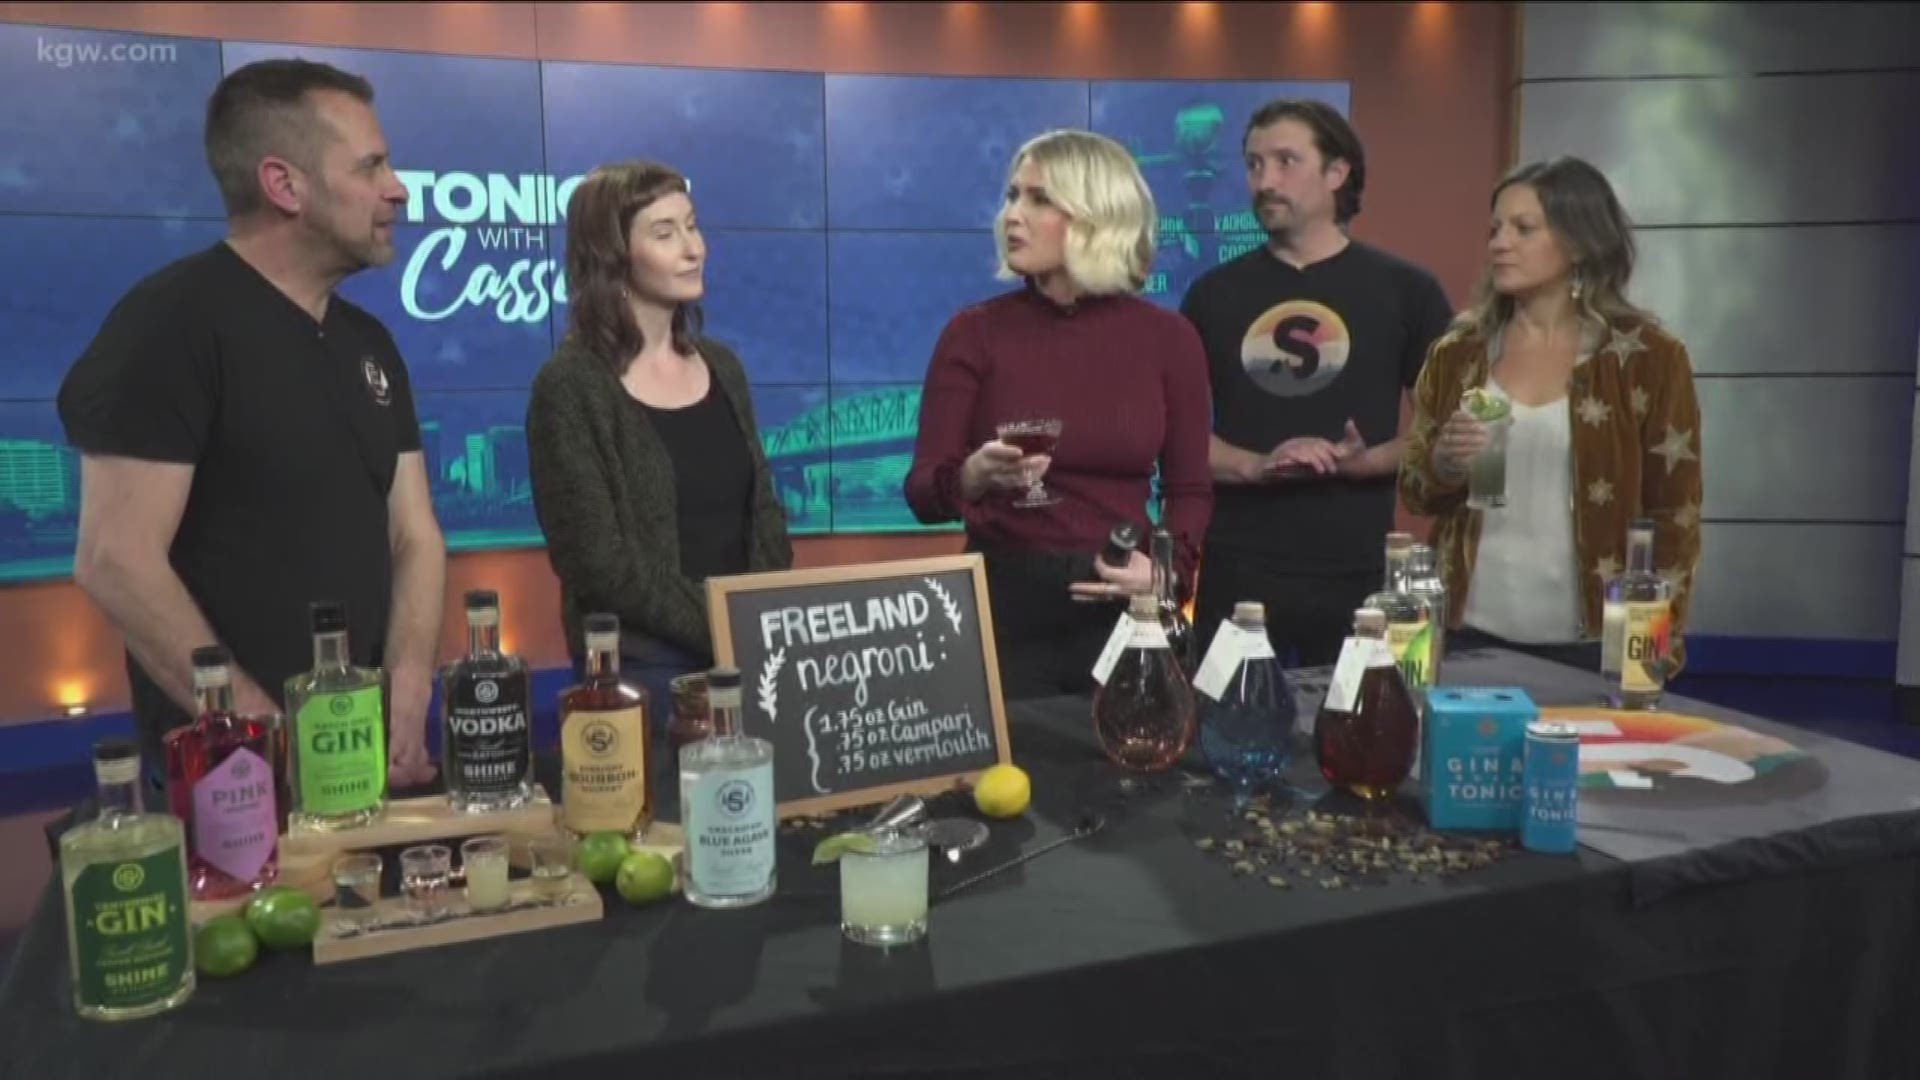 It was called Toast last year. Check out Oregon Distilled for all over your favorite spirits and food.
oregondistilled.com
#TonightwithCassidy